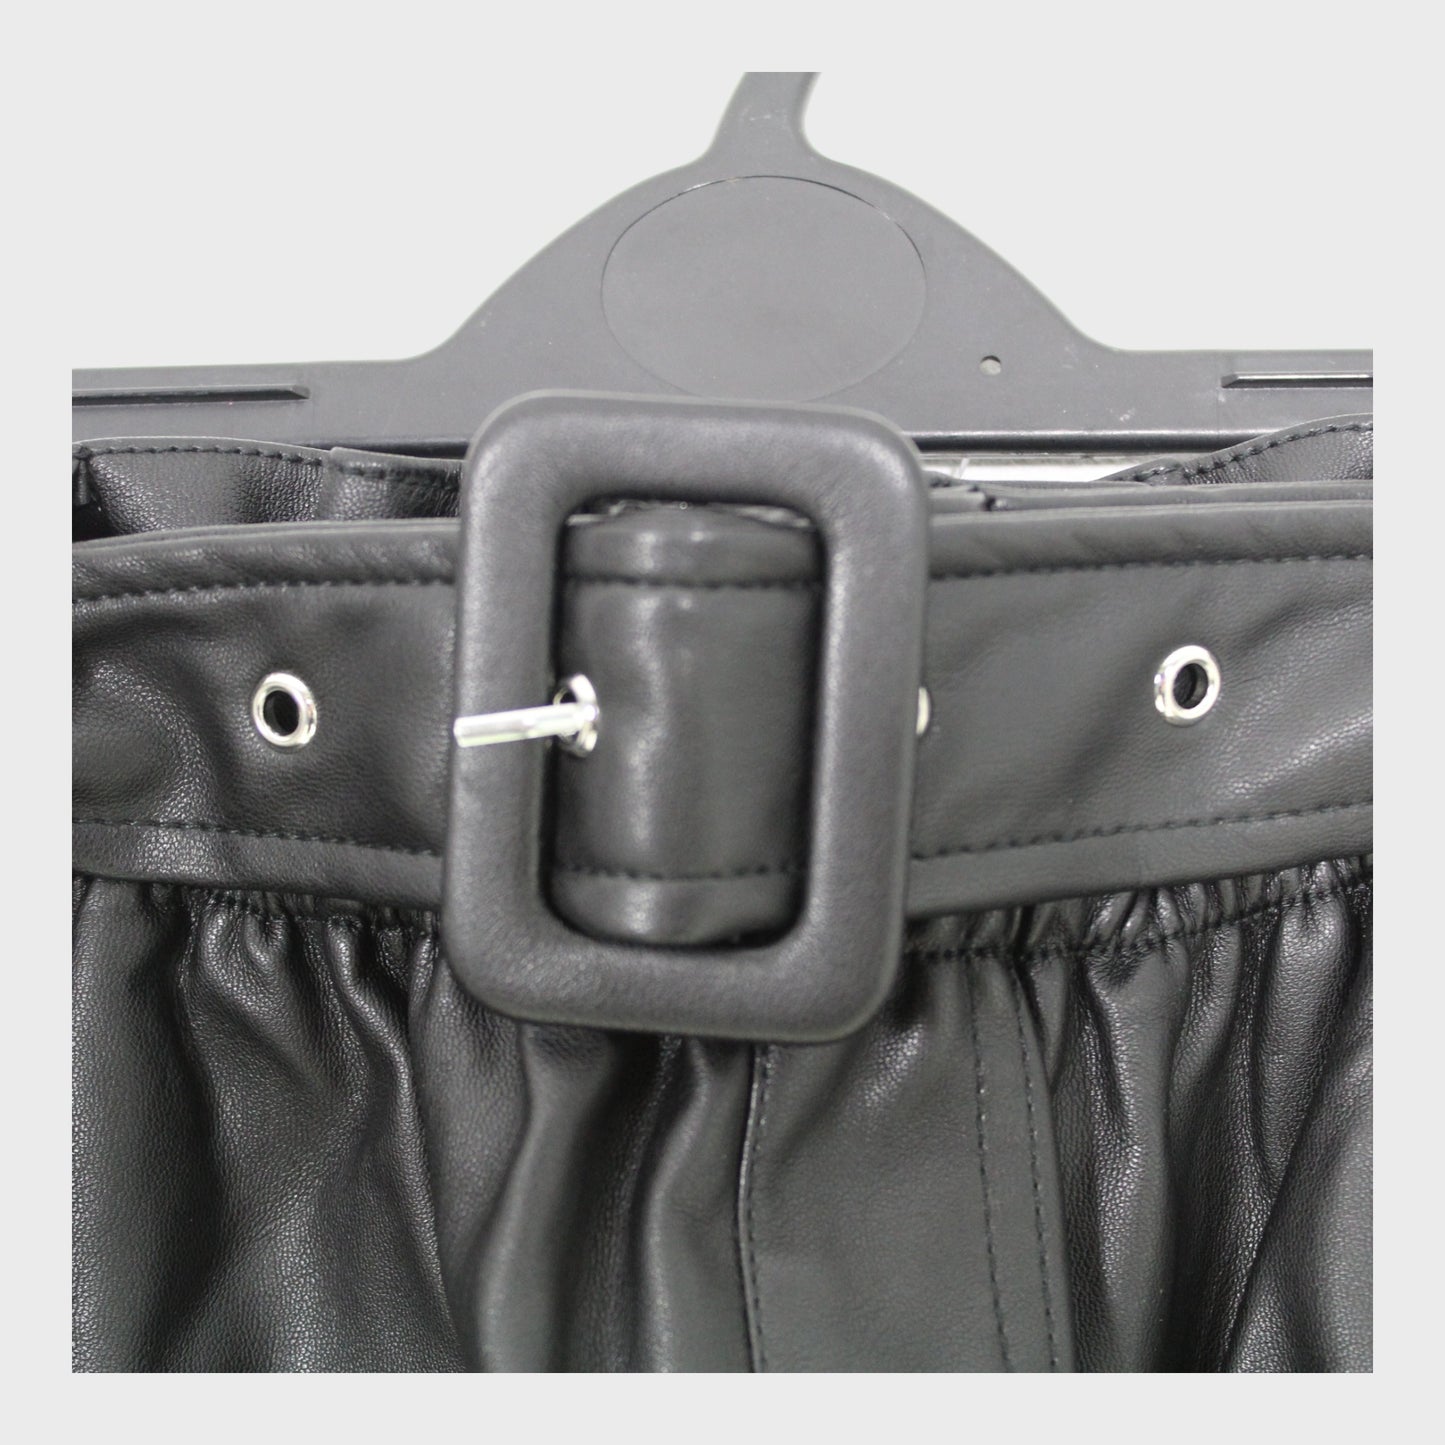 Kid's Leather-look Shorts with Belt Black 15/16yrs